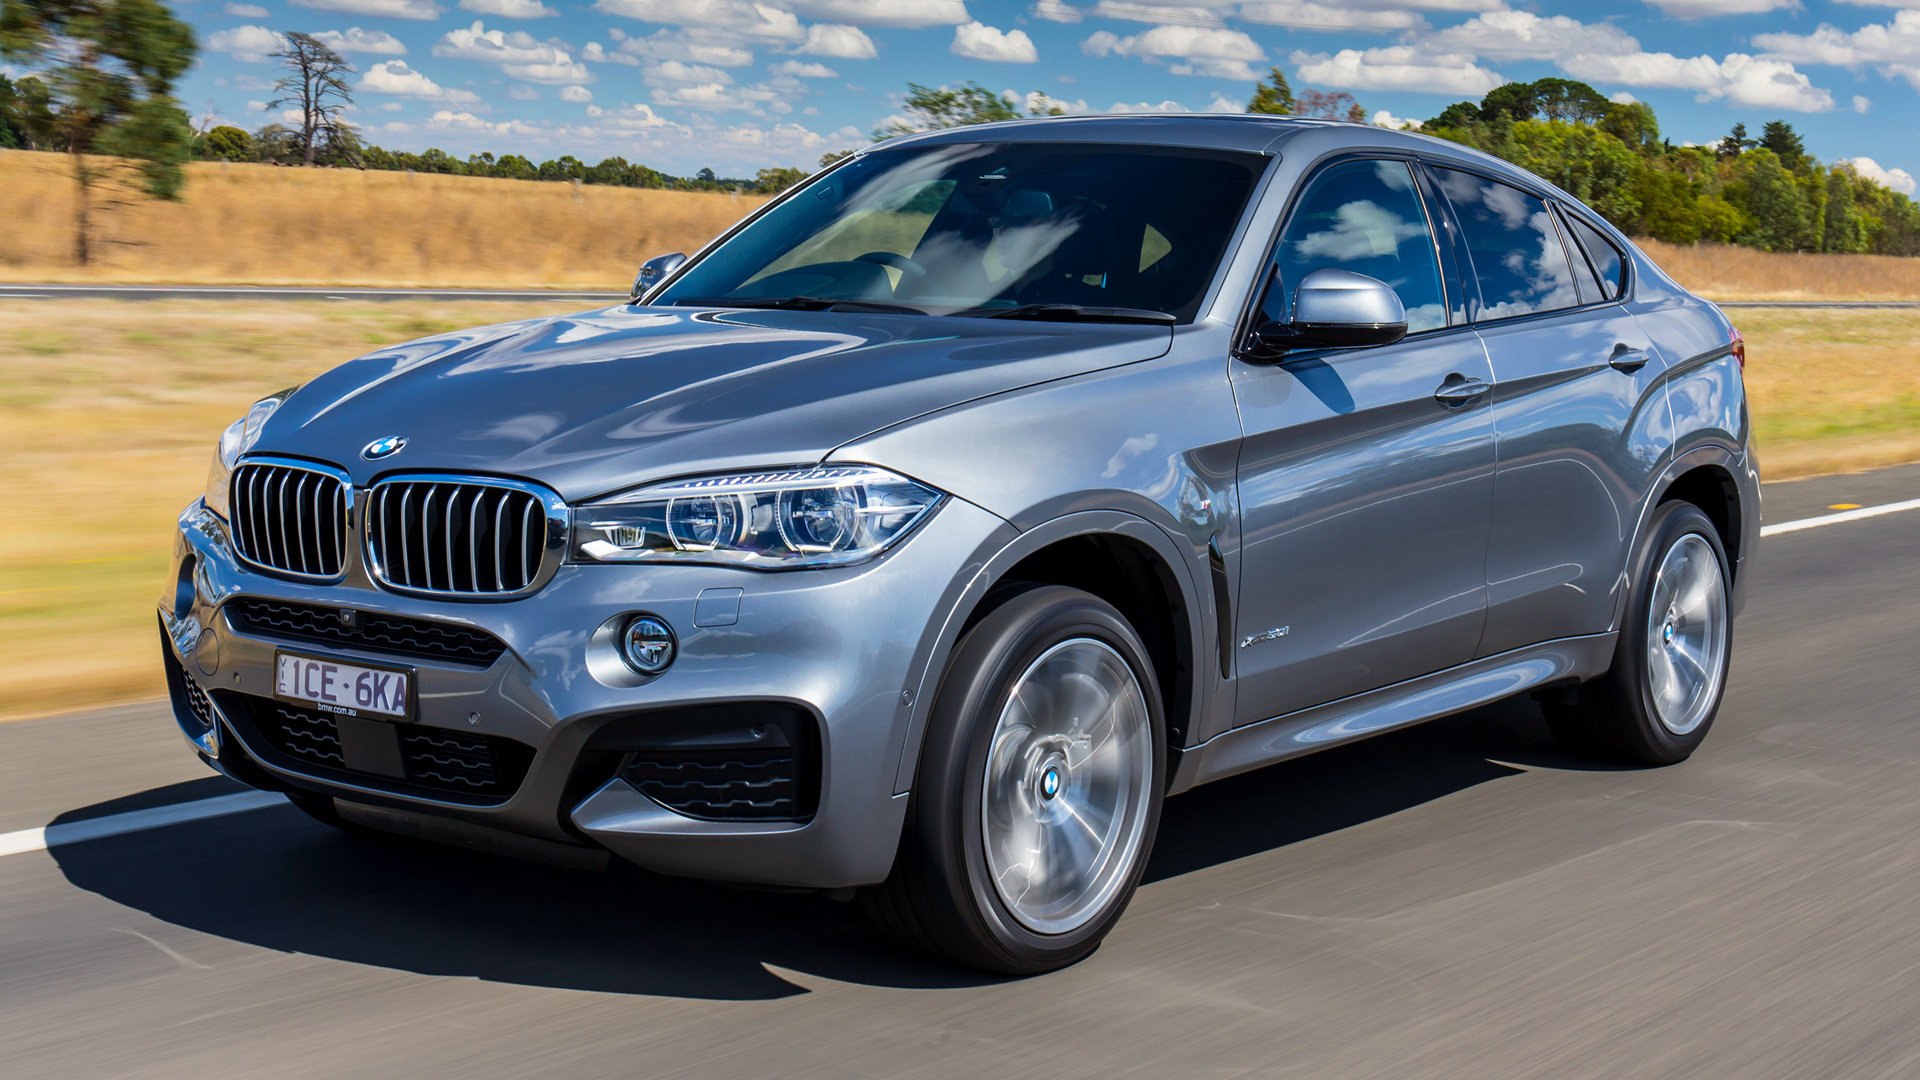 5 - The Least Reliable Cars You Can Buy - BMW X6